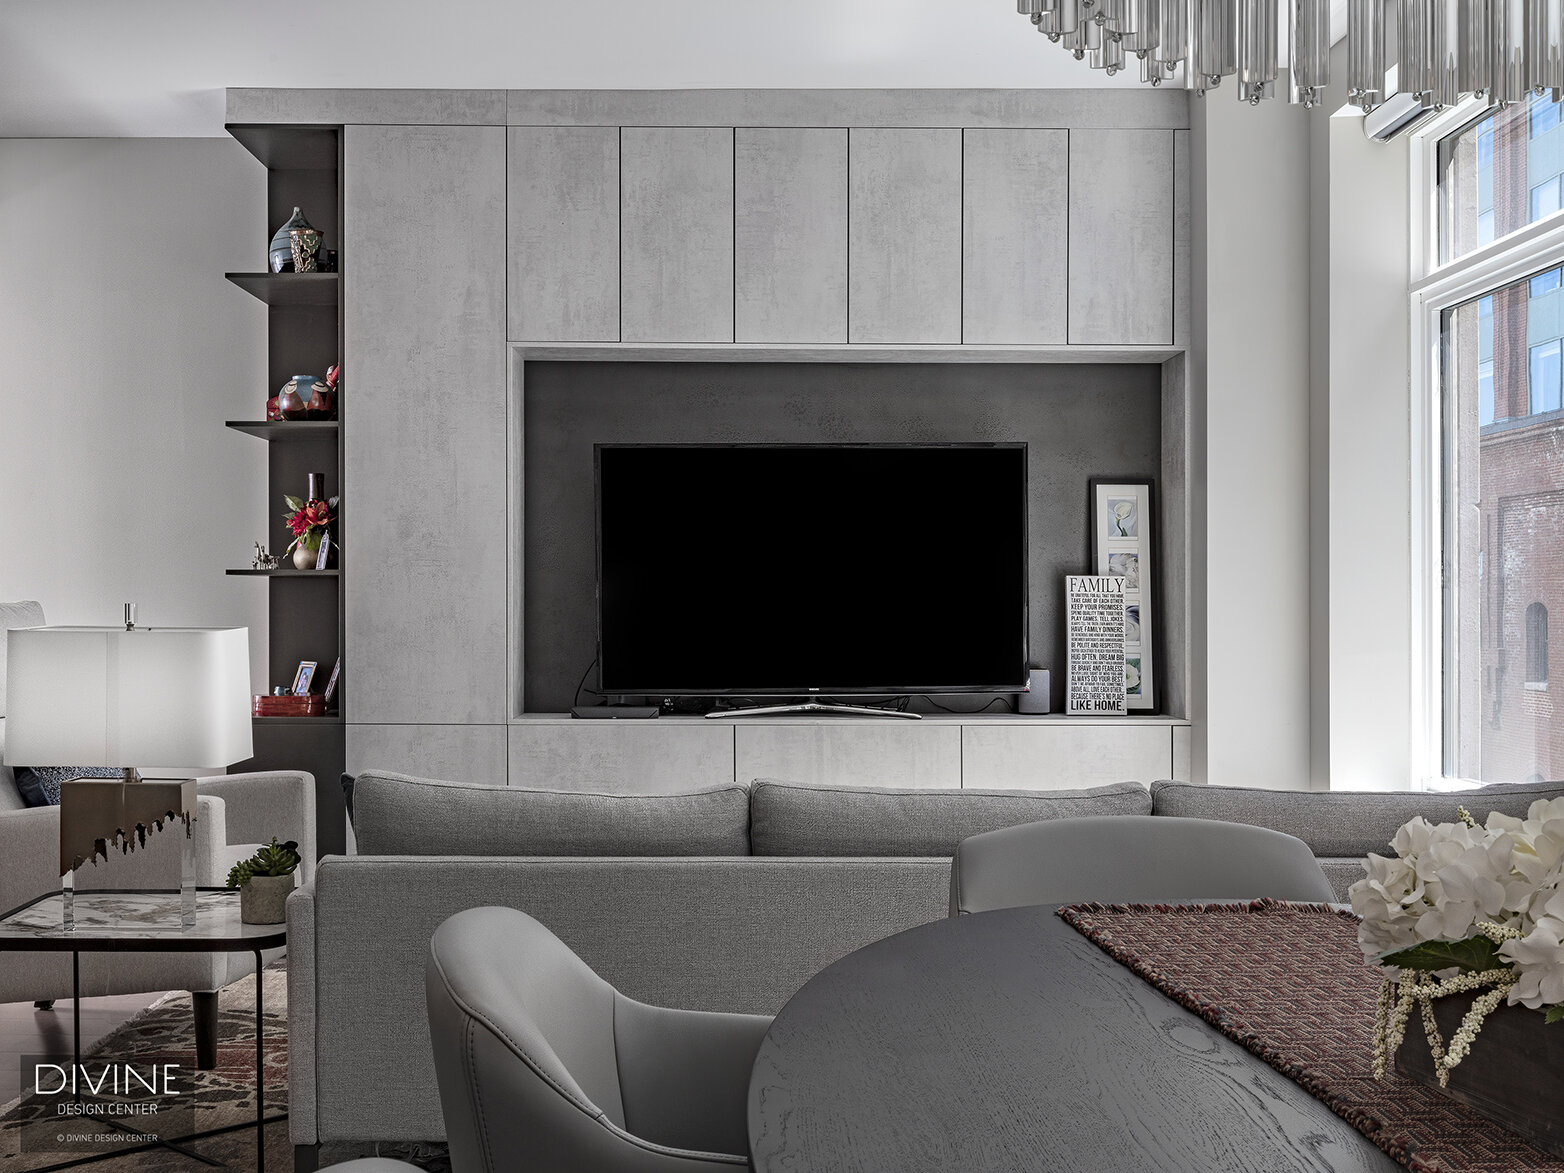   Faux concrete built-ins surround a flat-screen tv. Niche shelving is installed to the left of the tv surround and is adorned with several objects and vessels on display. Rolf Benz dining chairs and a round, wood dining table sit in the corner of th